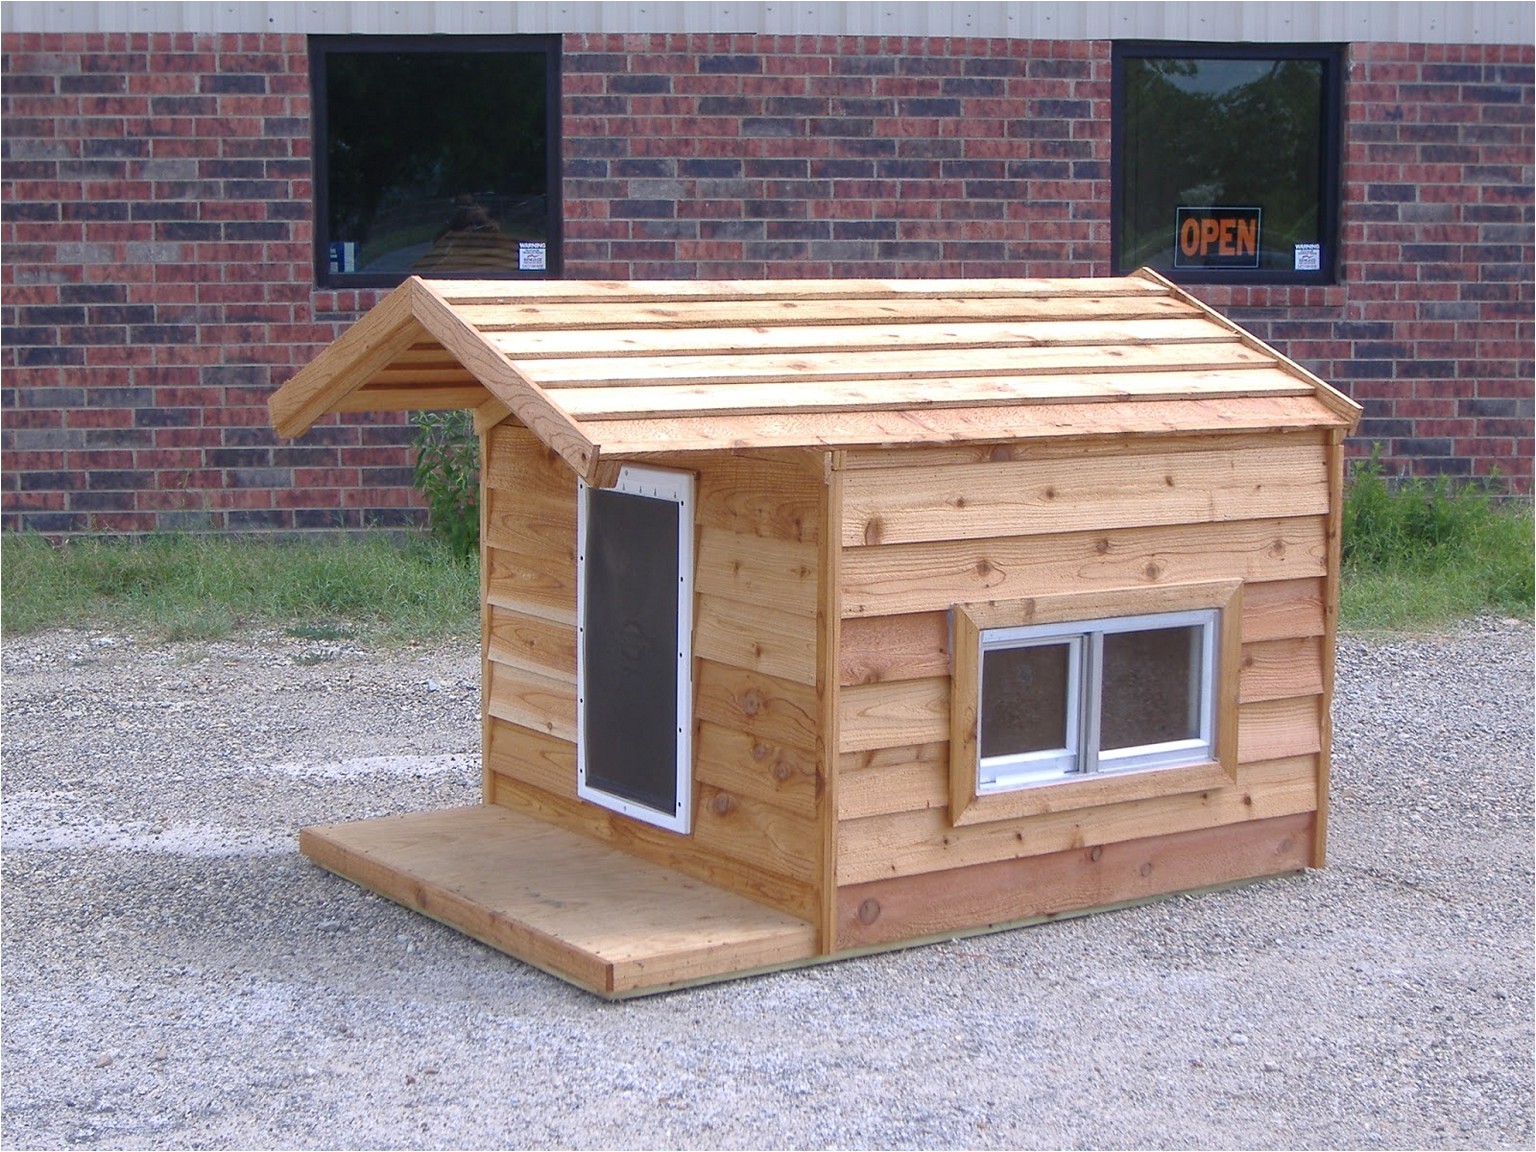 dog house designs with creative plans